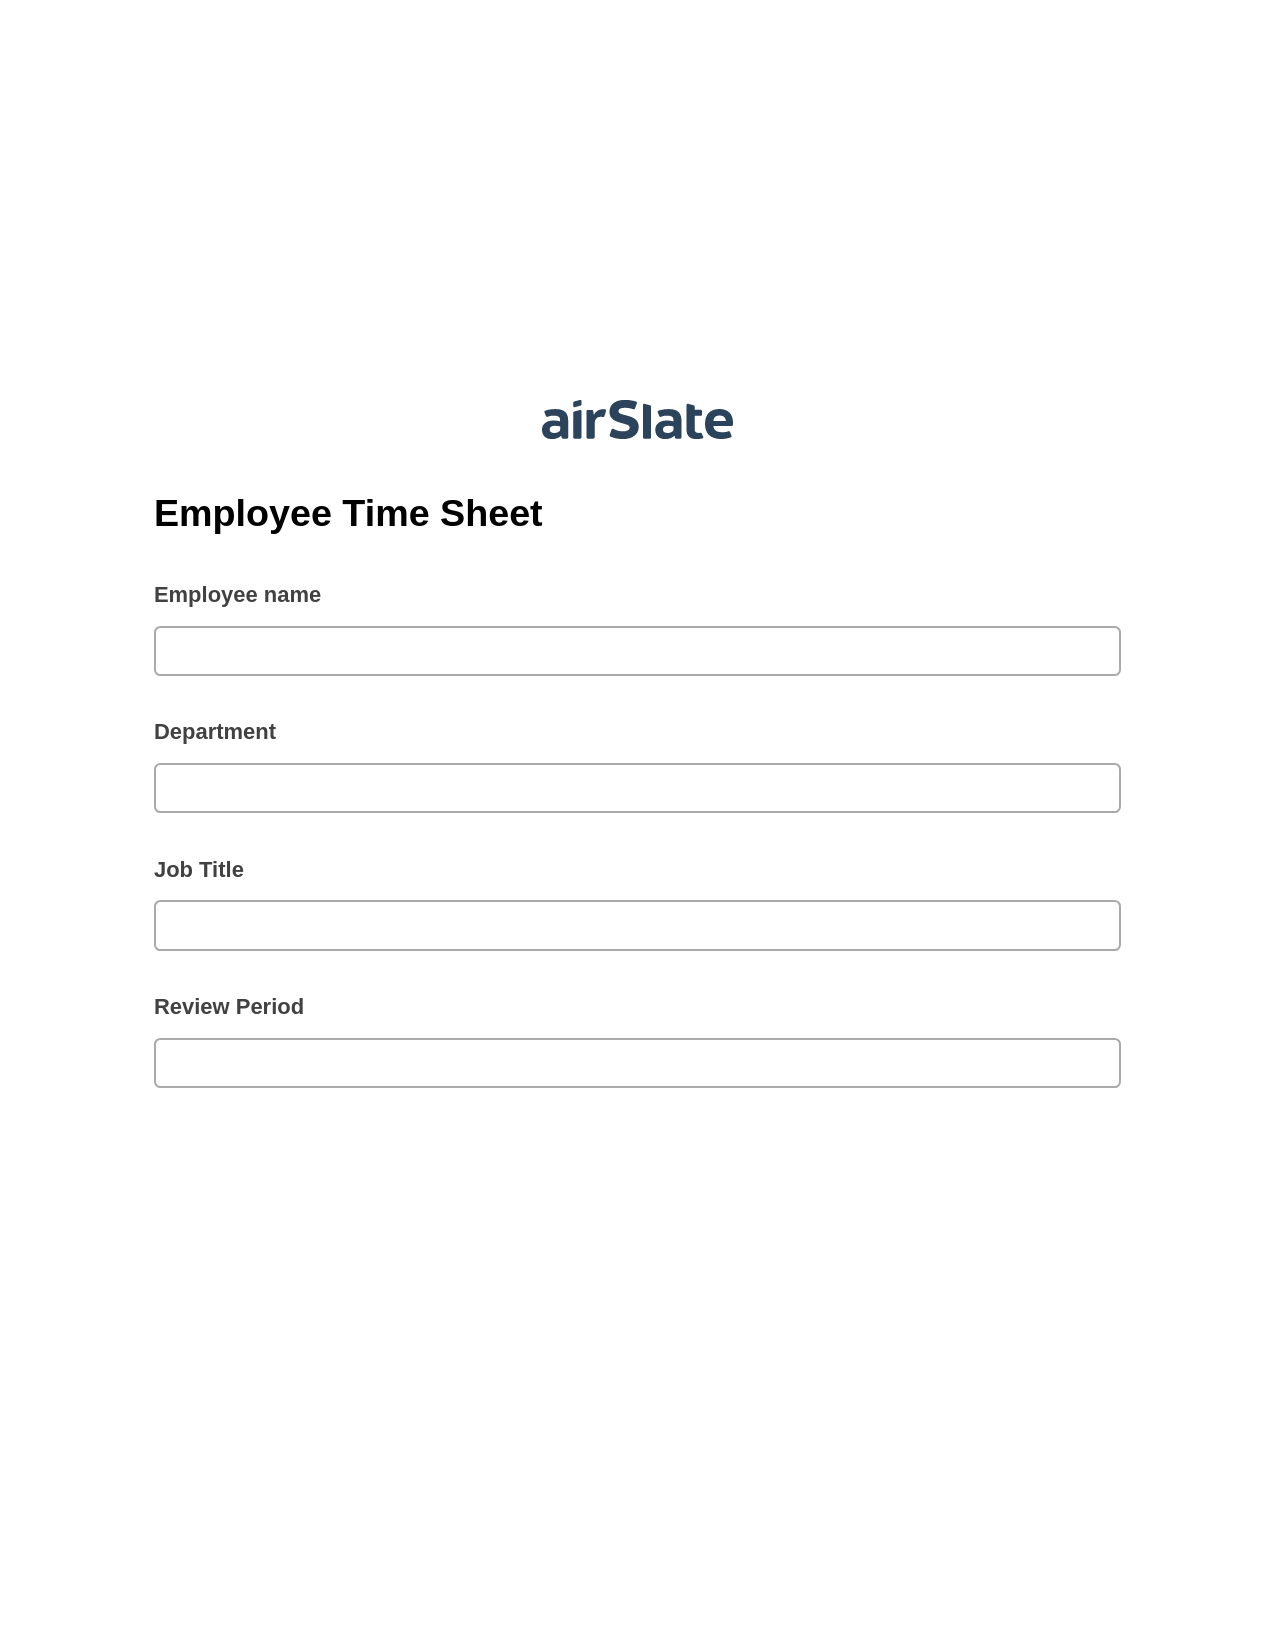 Employee Time Sheet Pre-fill Dropdowns from Google Sheet Bot, Update Audit Trail Bot, Archive to SharePoint Folder Bot